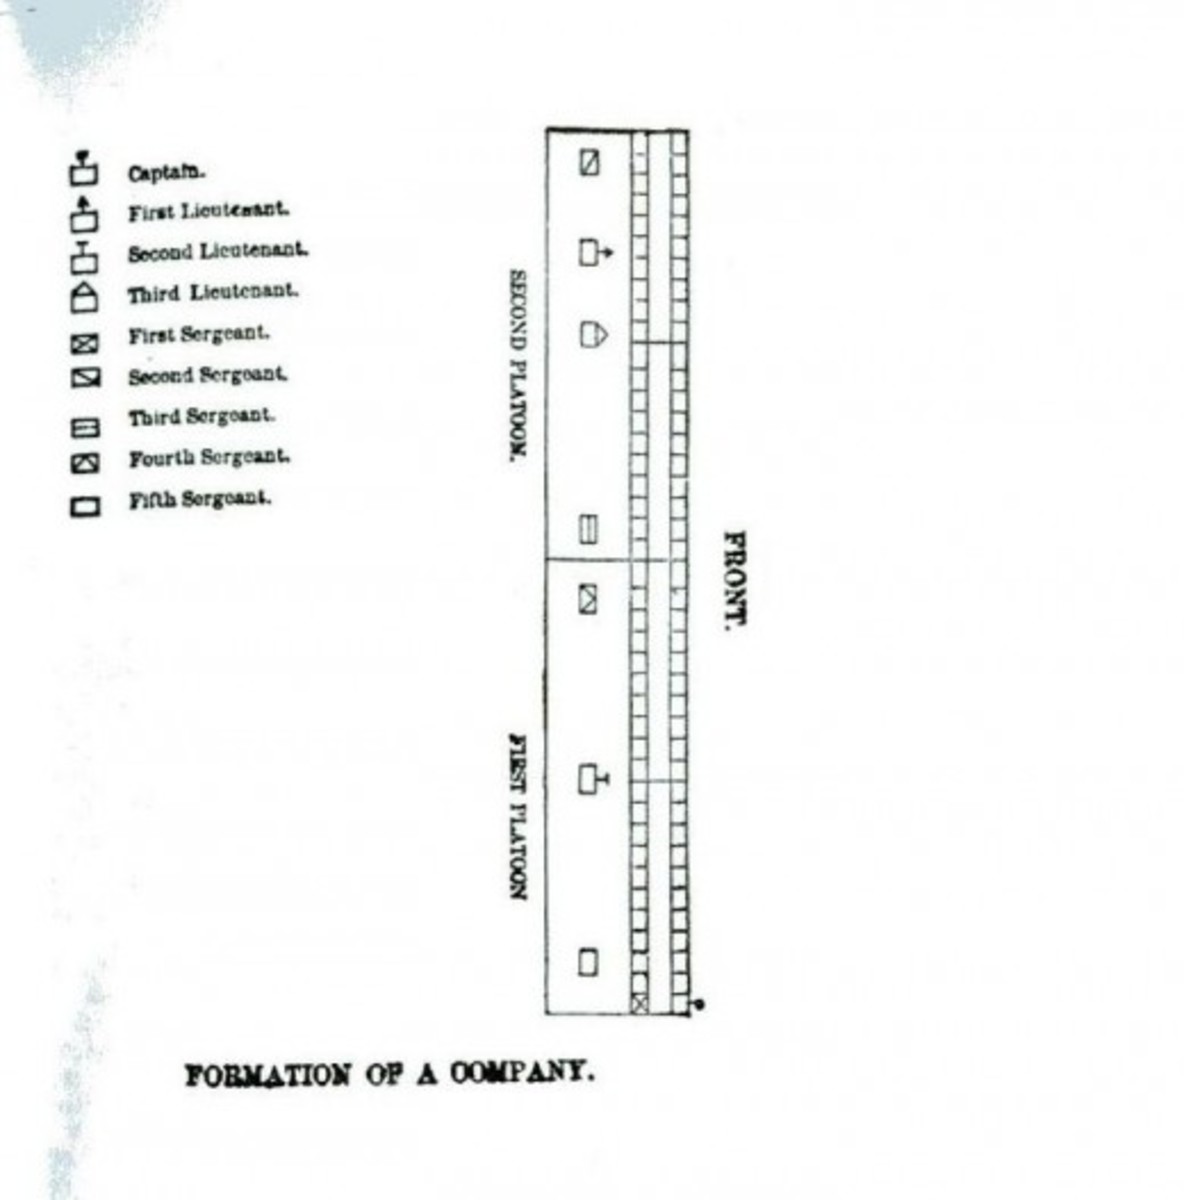 This is a diagram of the formation of a Company, taken from a drill manual, which shows subdivisions of the Company and the various placements of officers and non-commissioned officers along with the private soldiers.